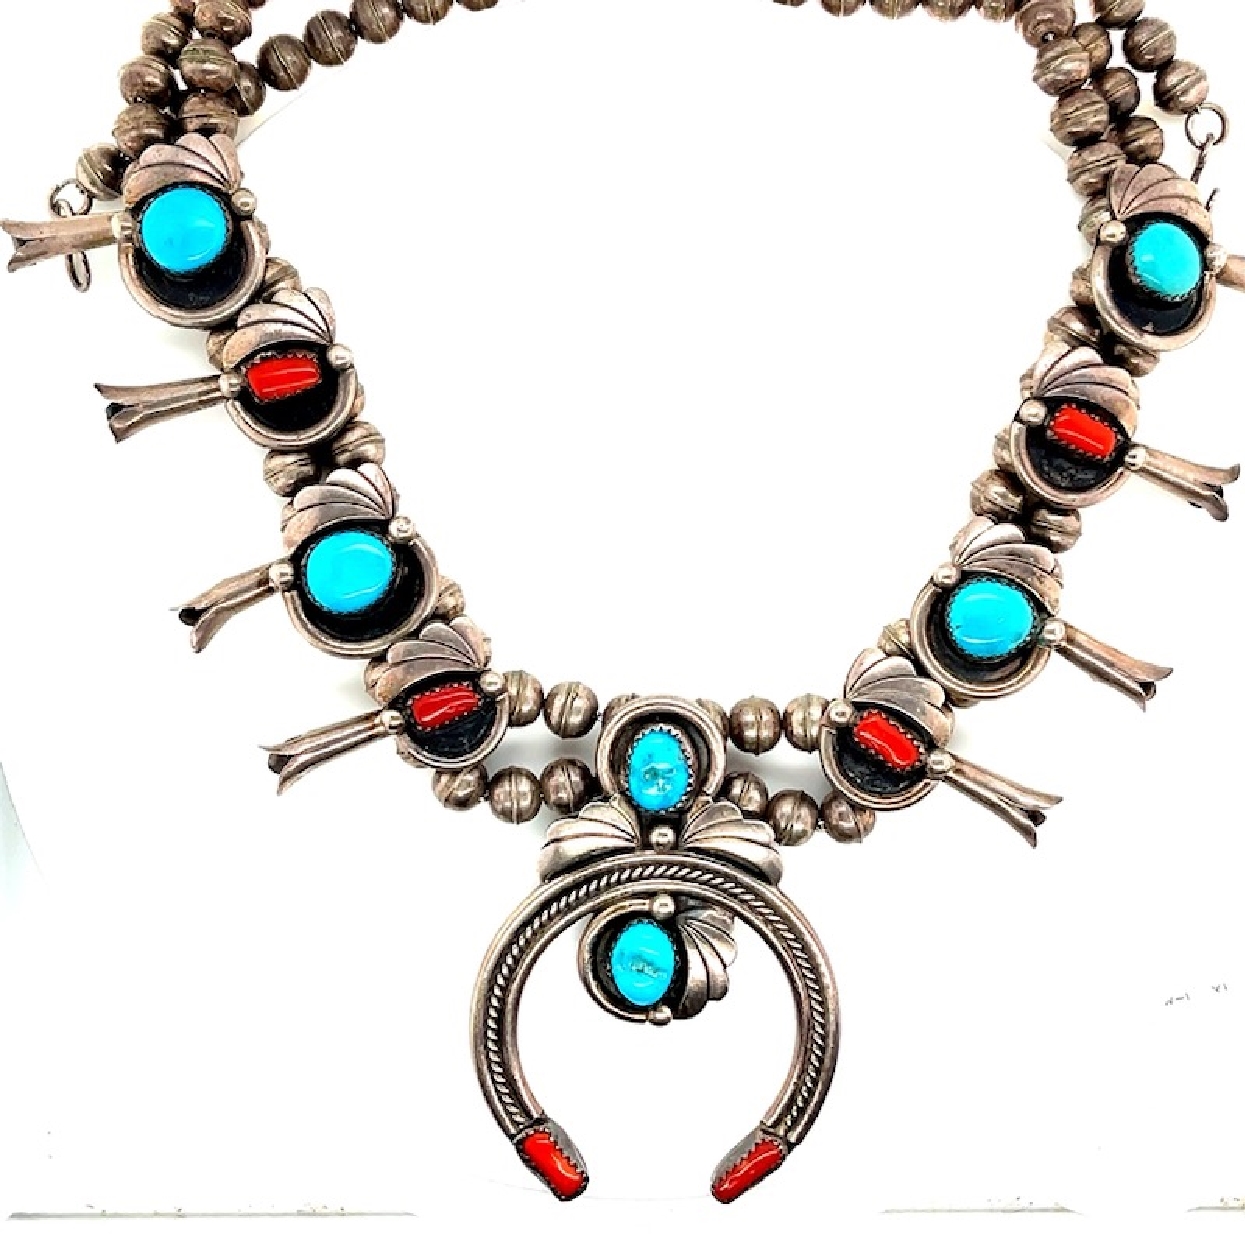 Sqashblossom Necklace In Sterling Silver with Turquoise and Coral

24 Inches